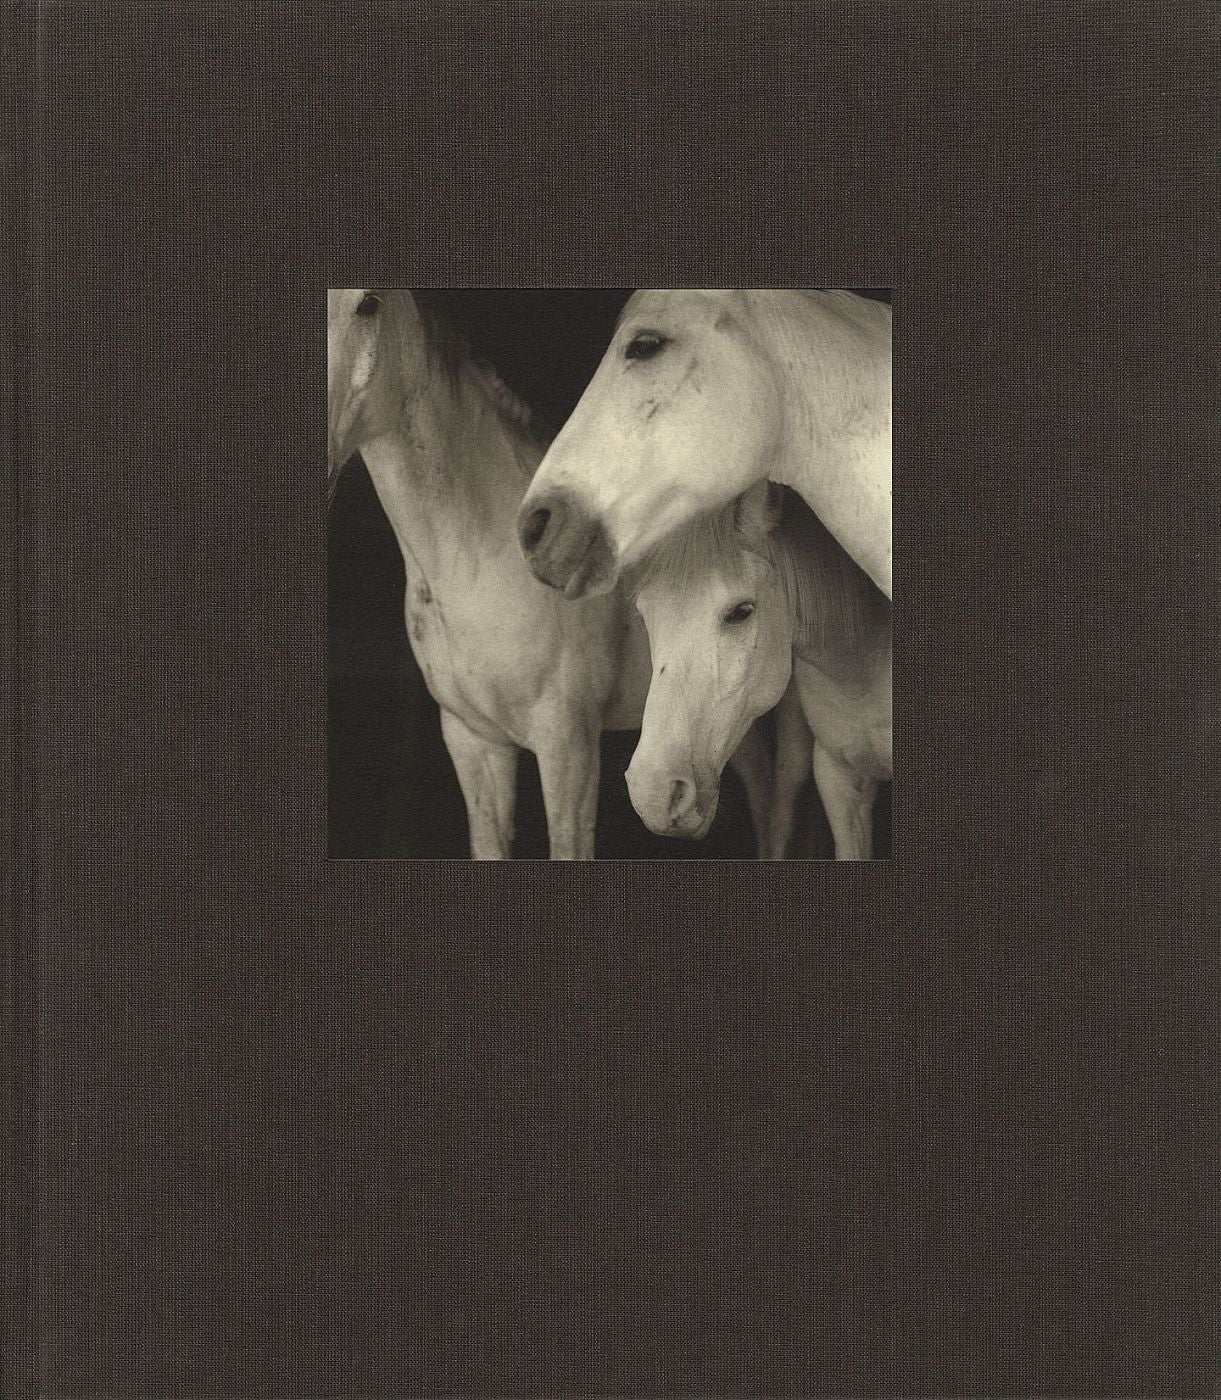 21st Editions Journal of Contemporary Photography Volume 1 (One/I) [SIGNED & INSCRIBED]